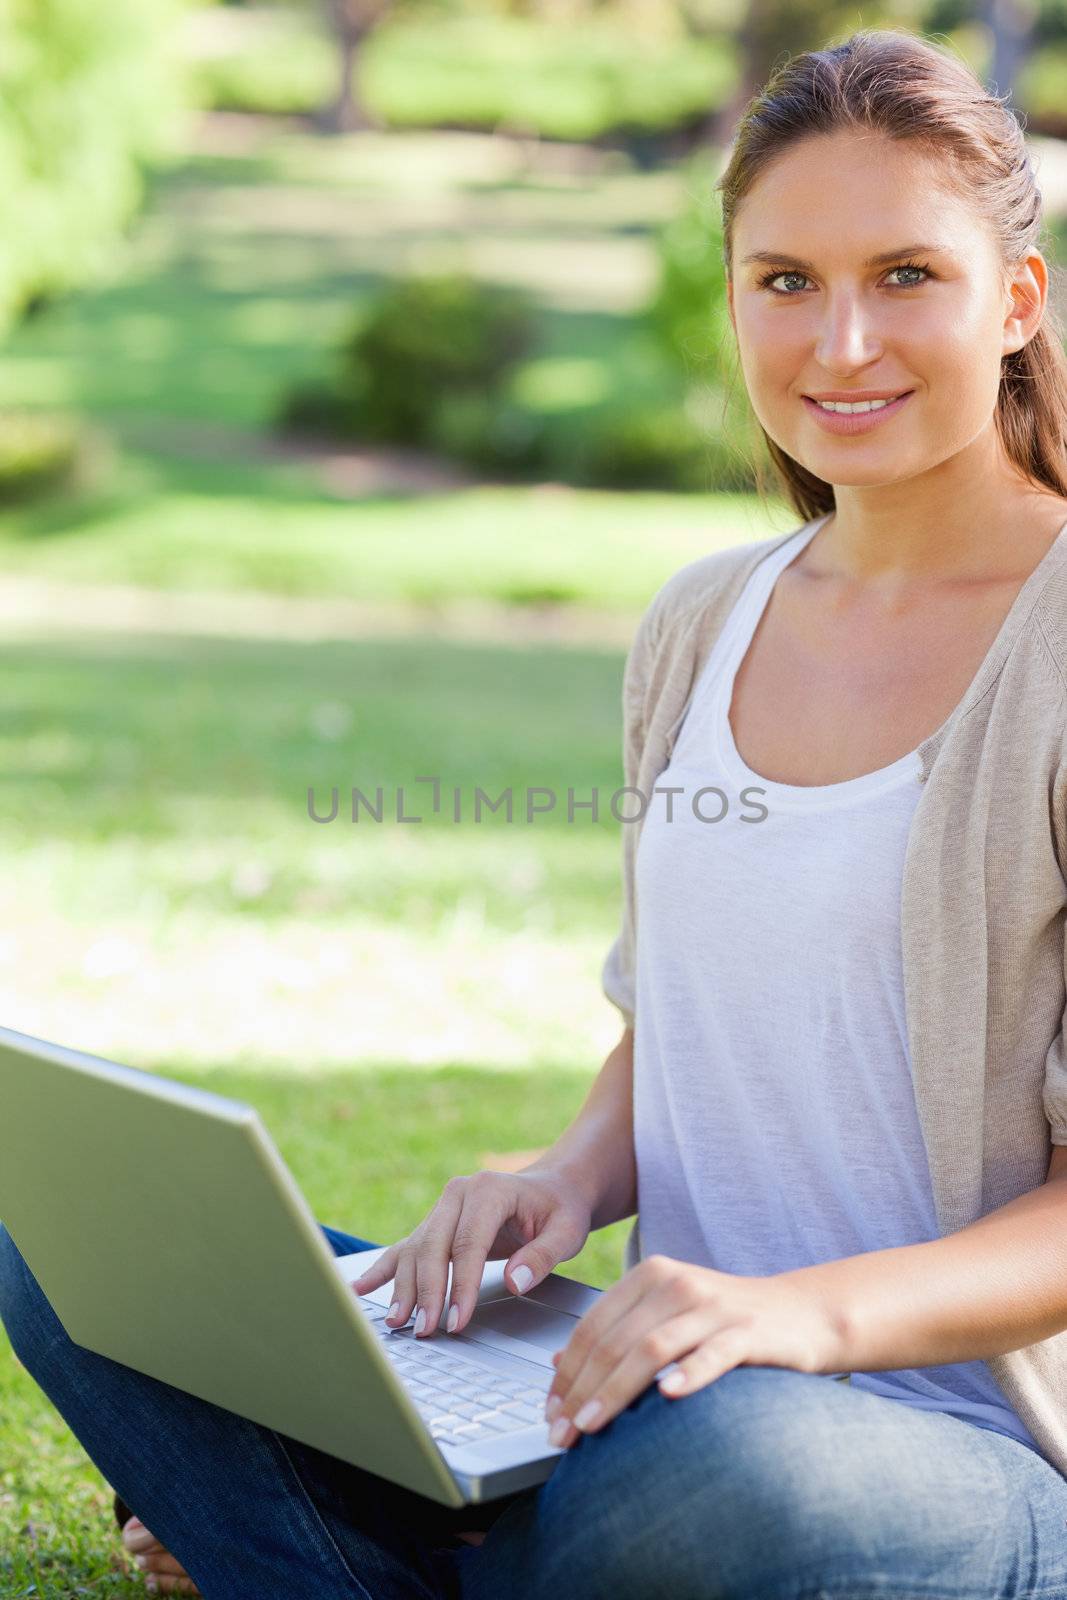 Smiling woman working on her laptop in the park by Wavebreakmedia